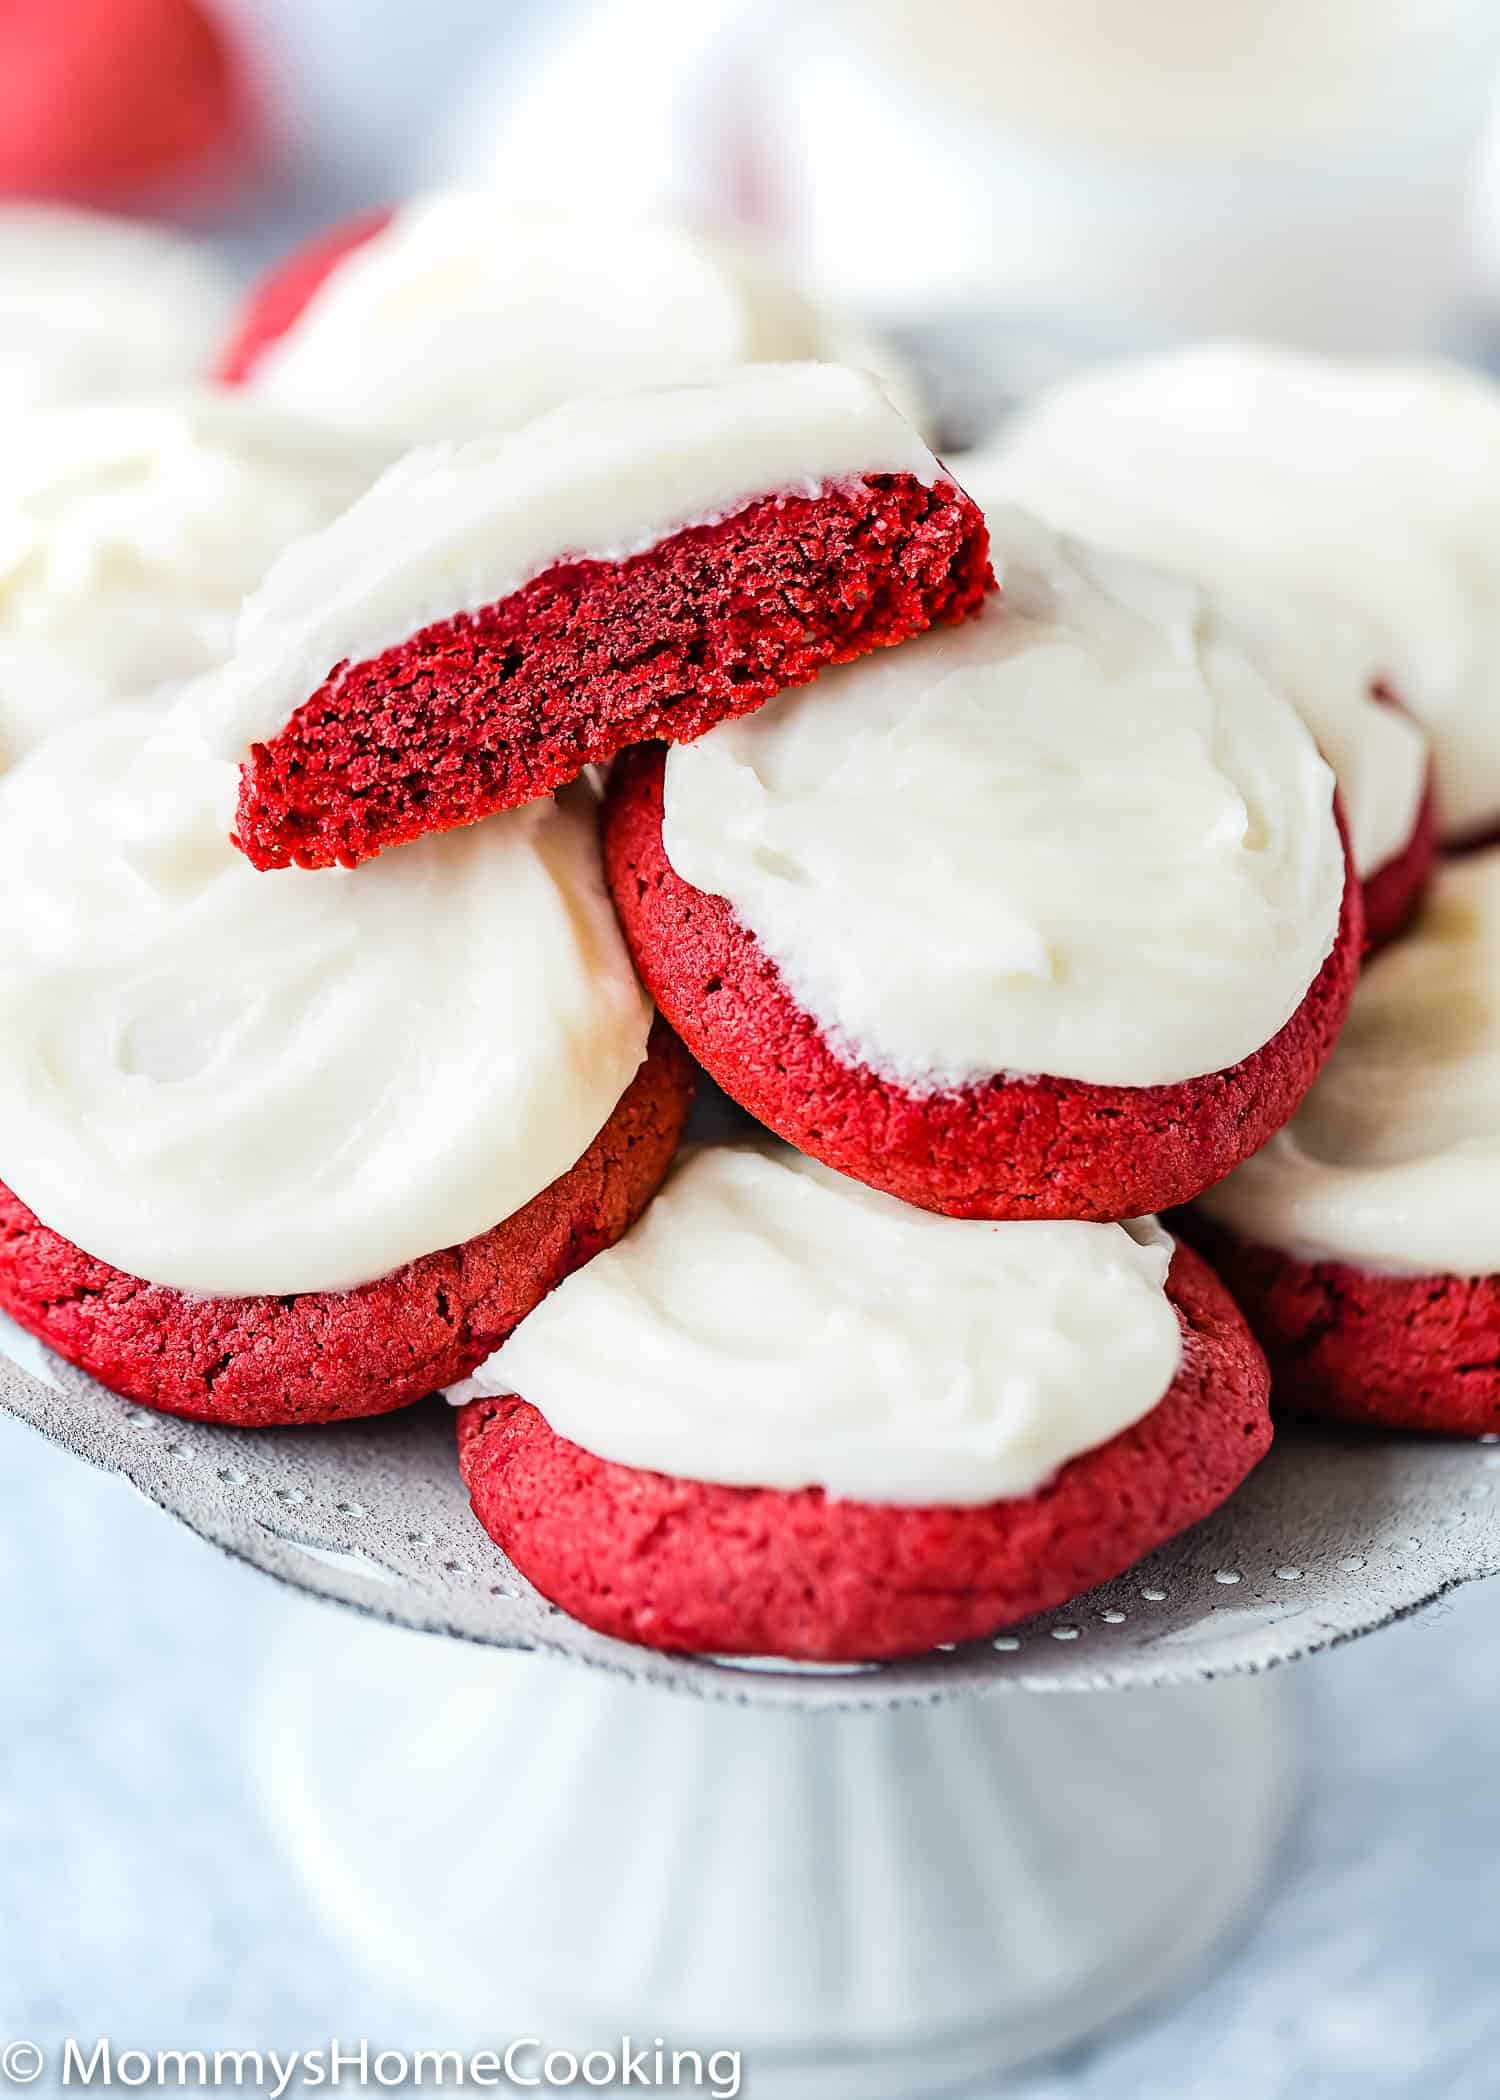 eggless red velvet cookies with cream cheese frosting showing inside texture